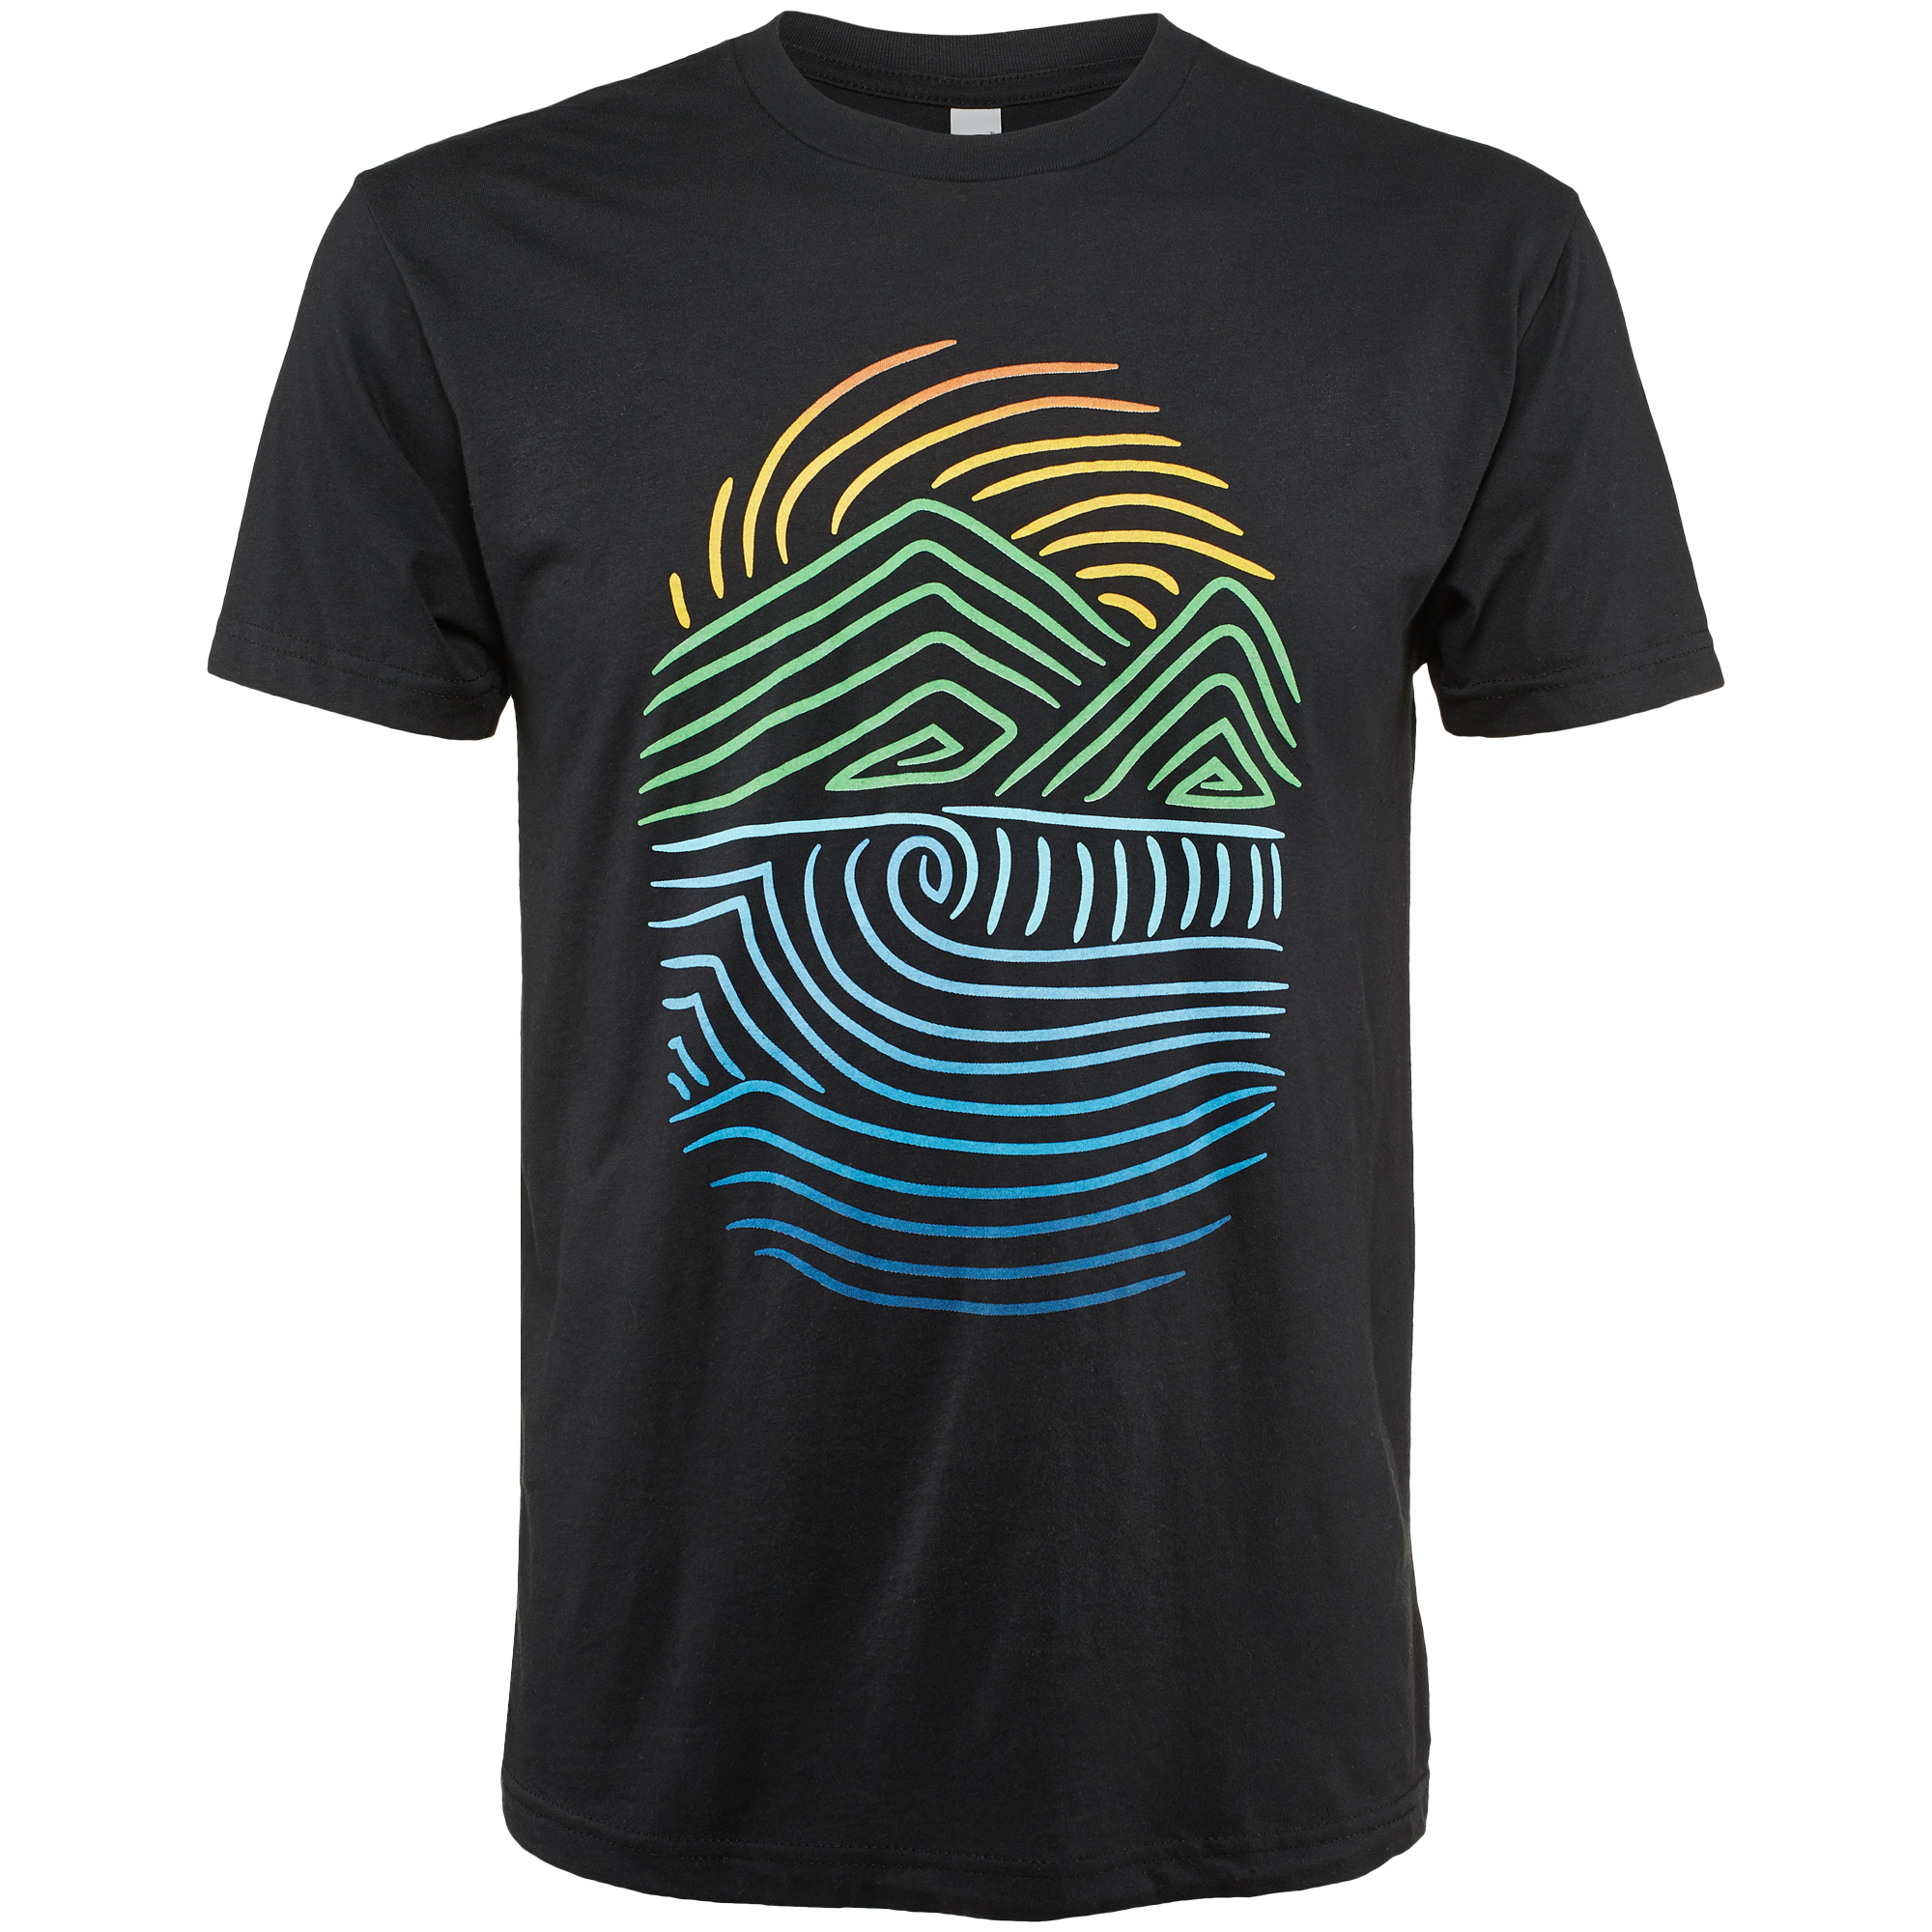 Men's Rainbow T-Shirt (Black) - One With Nature